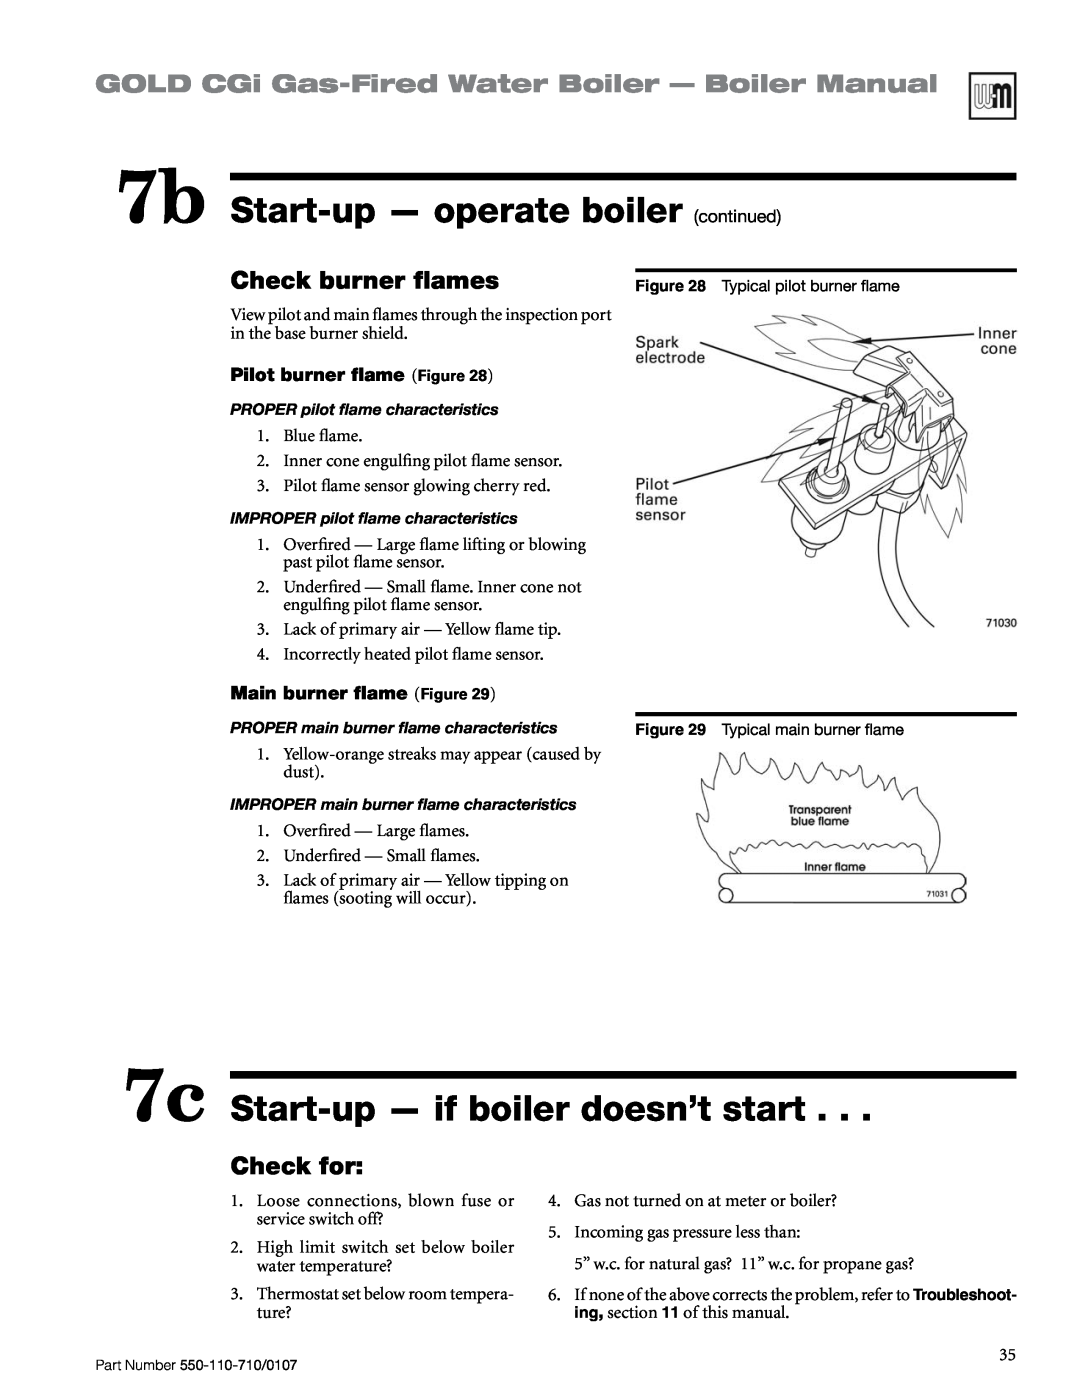 Weil-McLain 550-110-710/0107 manual 7b Start-up— operate boiler continued, 7c Start-up- if boiler doesn’t start 